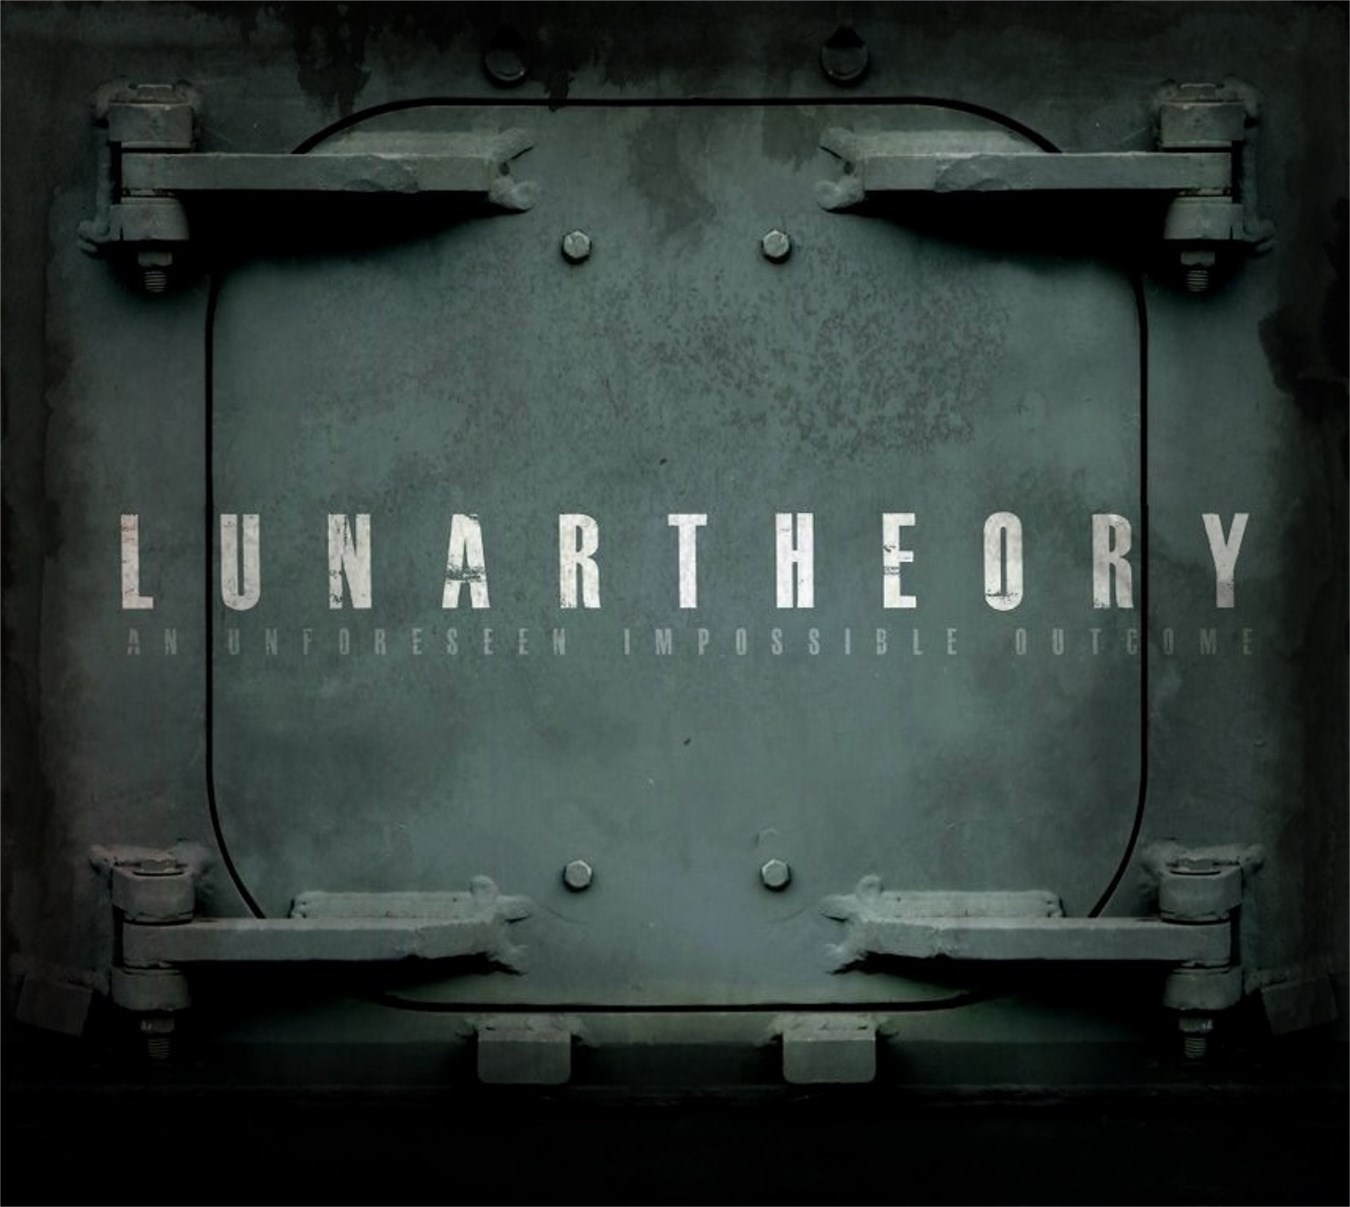 LUNARTHEORY - AN UNFORESEEN IMPOSSIBLE OUTCOME